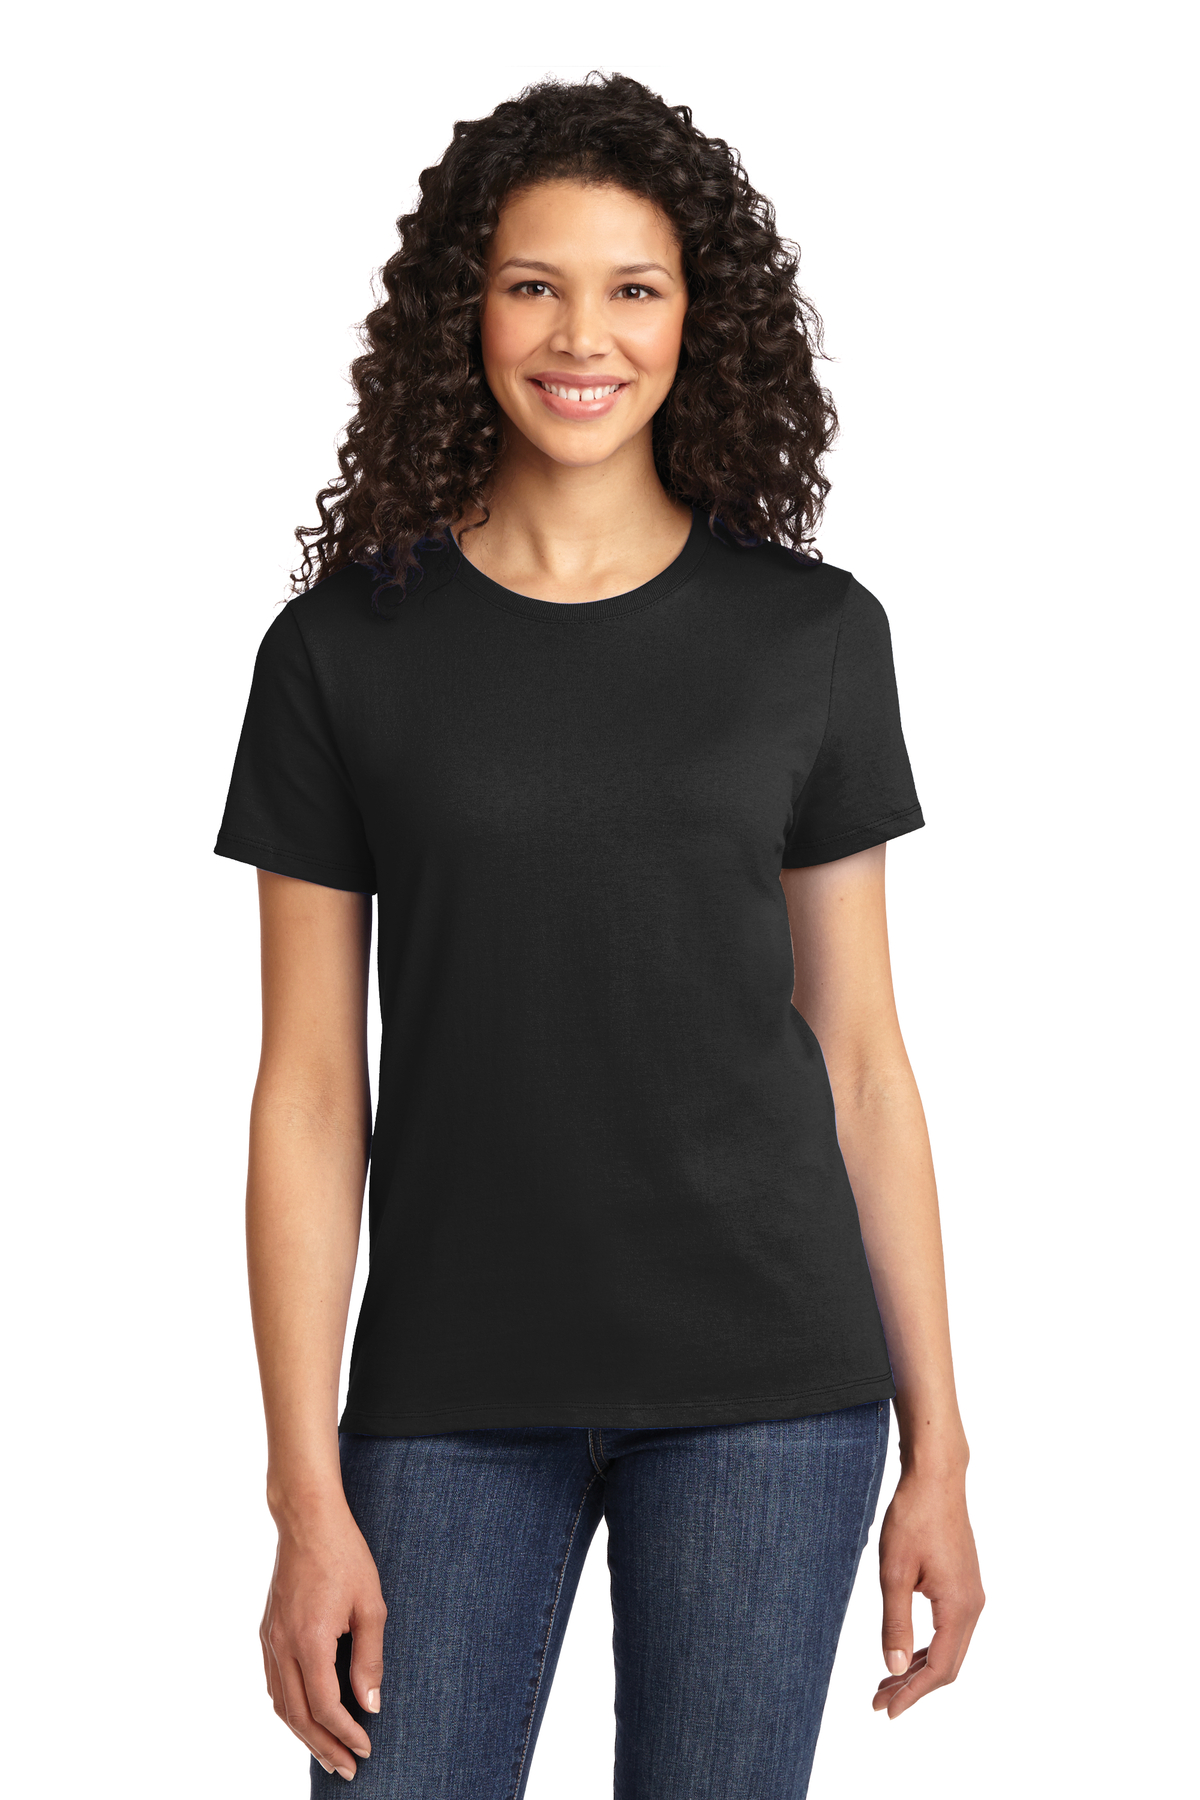 Port & Company Printed Women's Essential Tee | T-Shirts - Queensboro